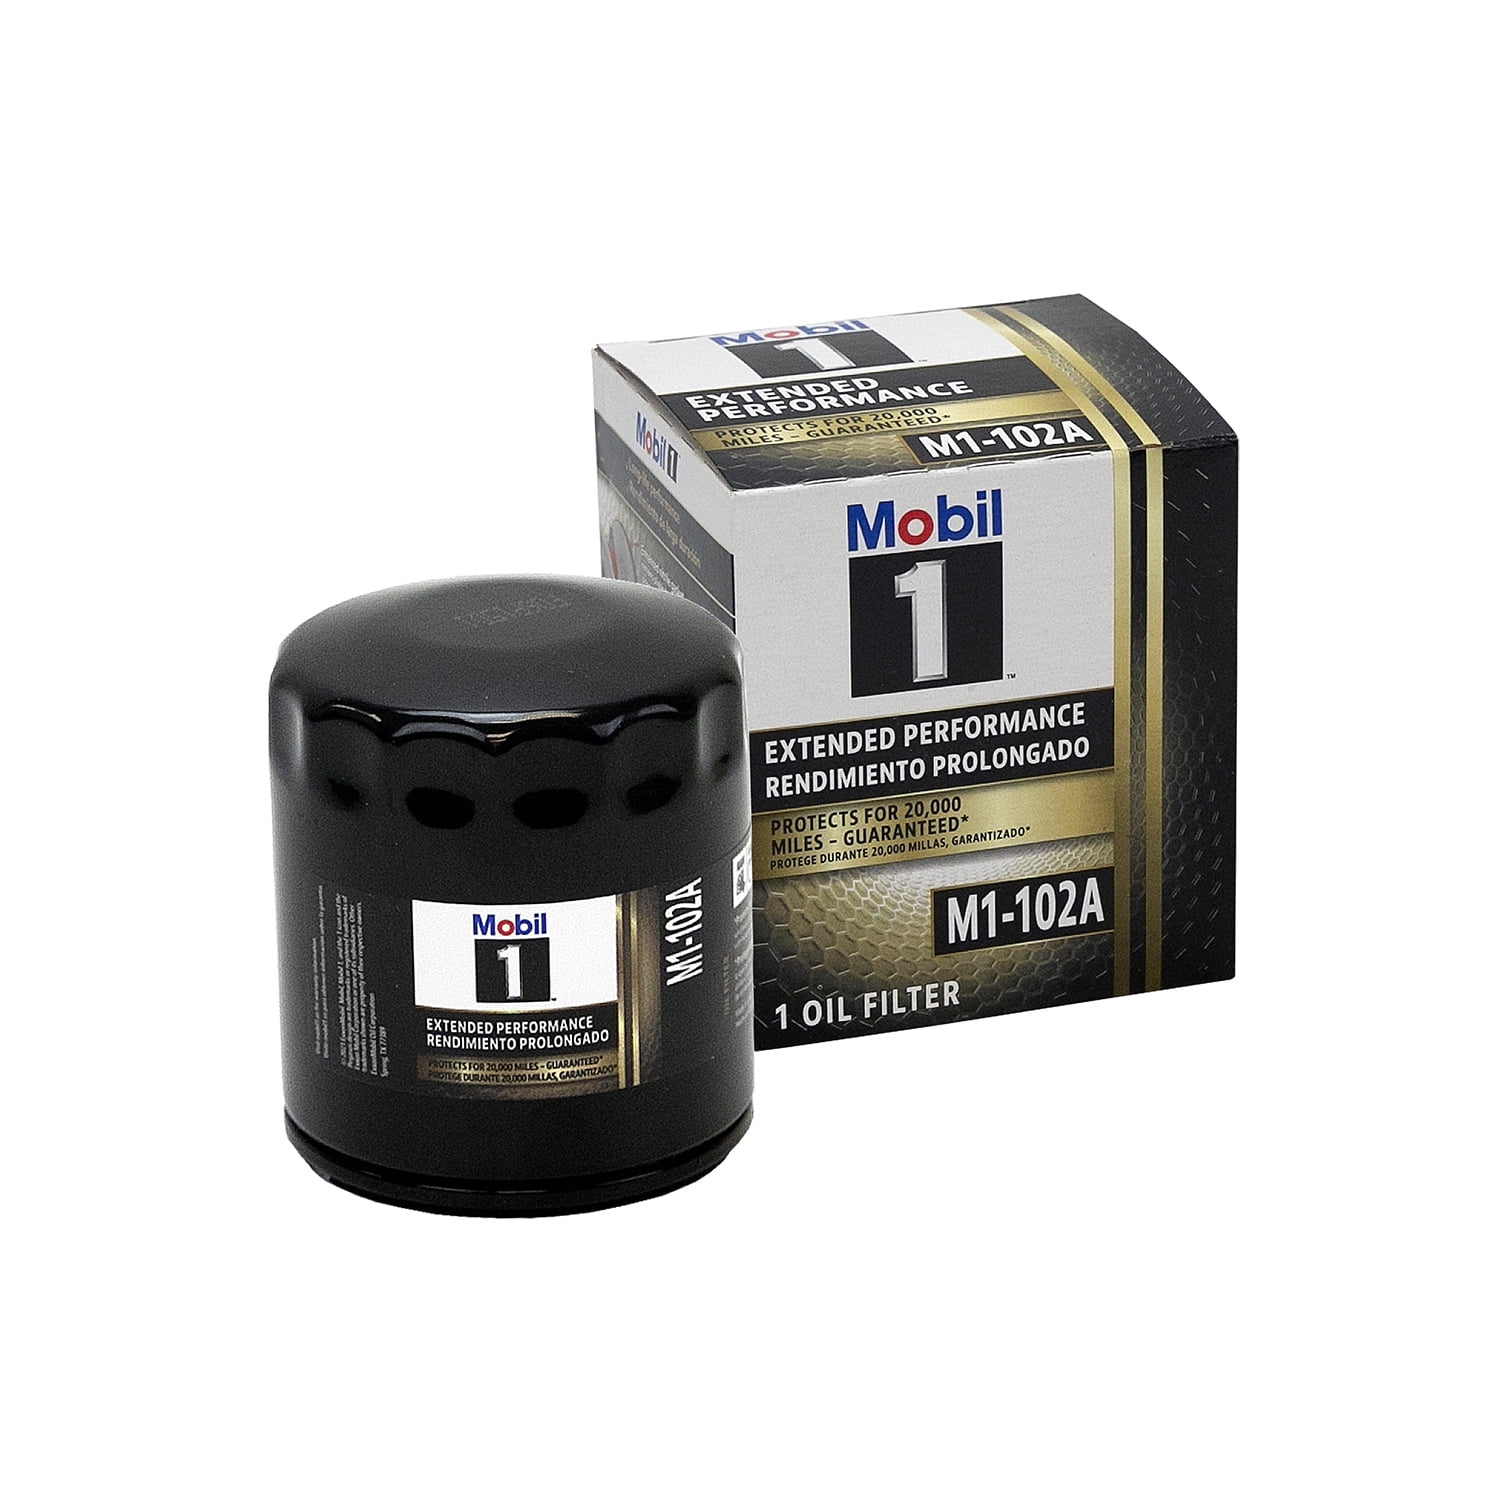 Mobil 1 M1-102A Extended Performance Oil Filter 